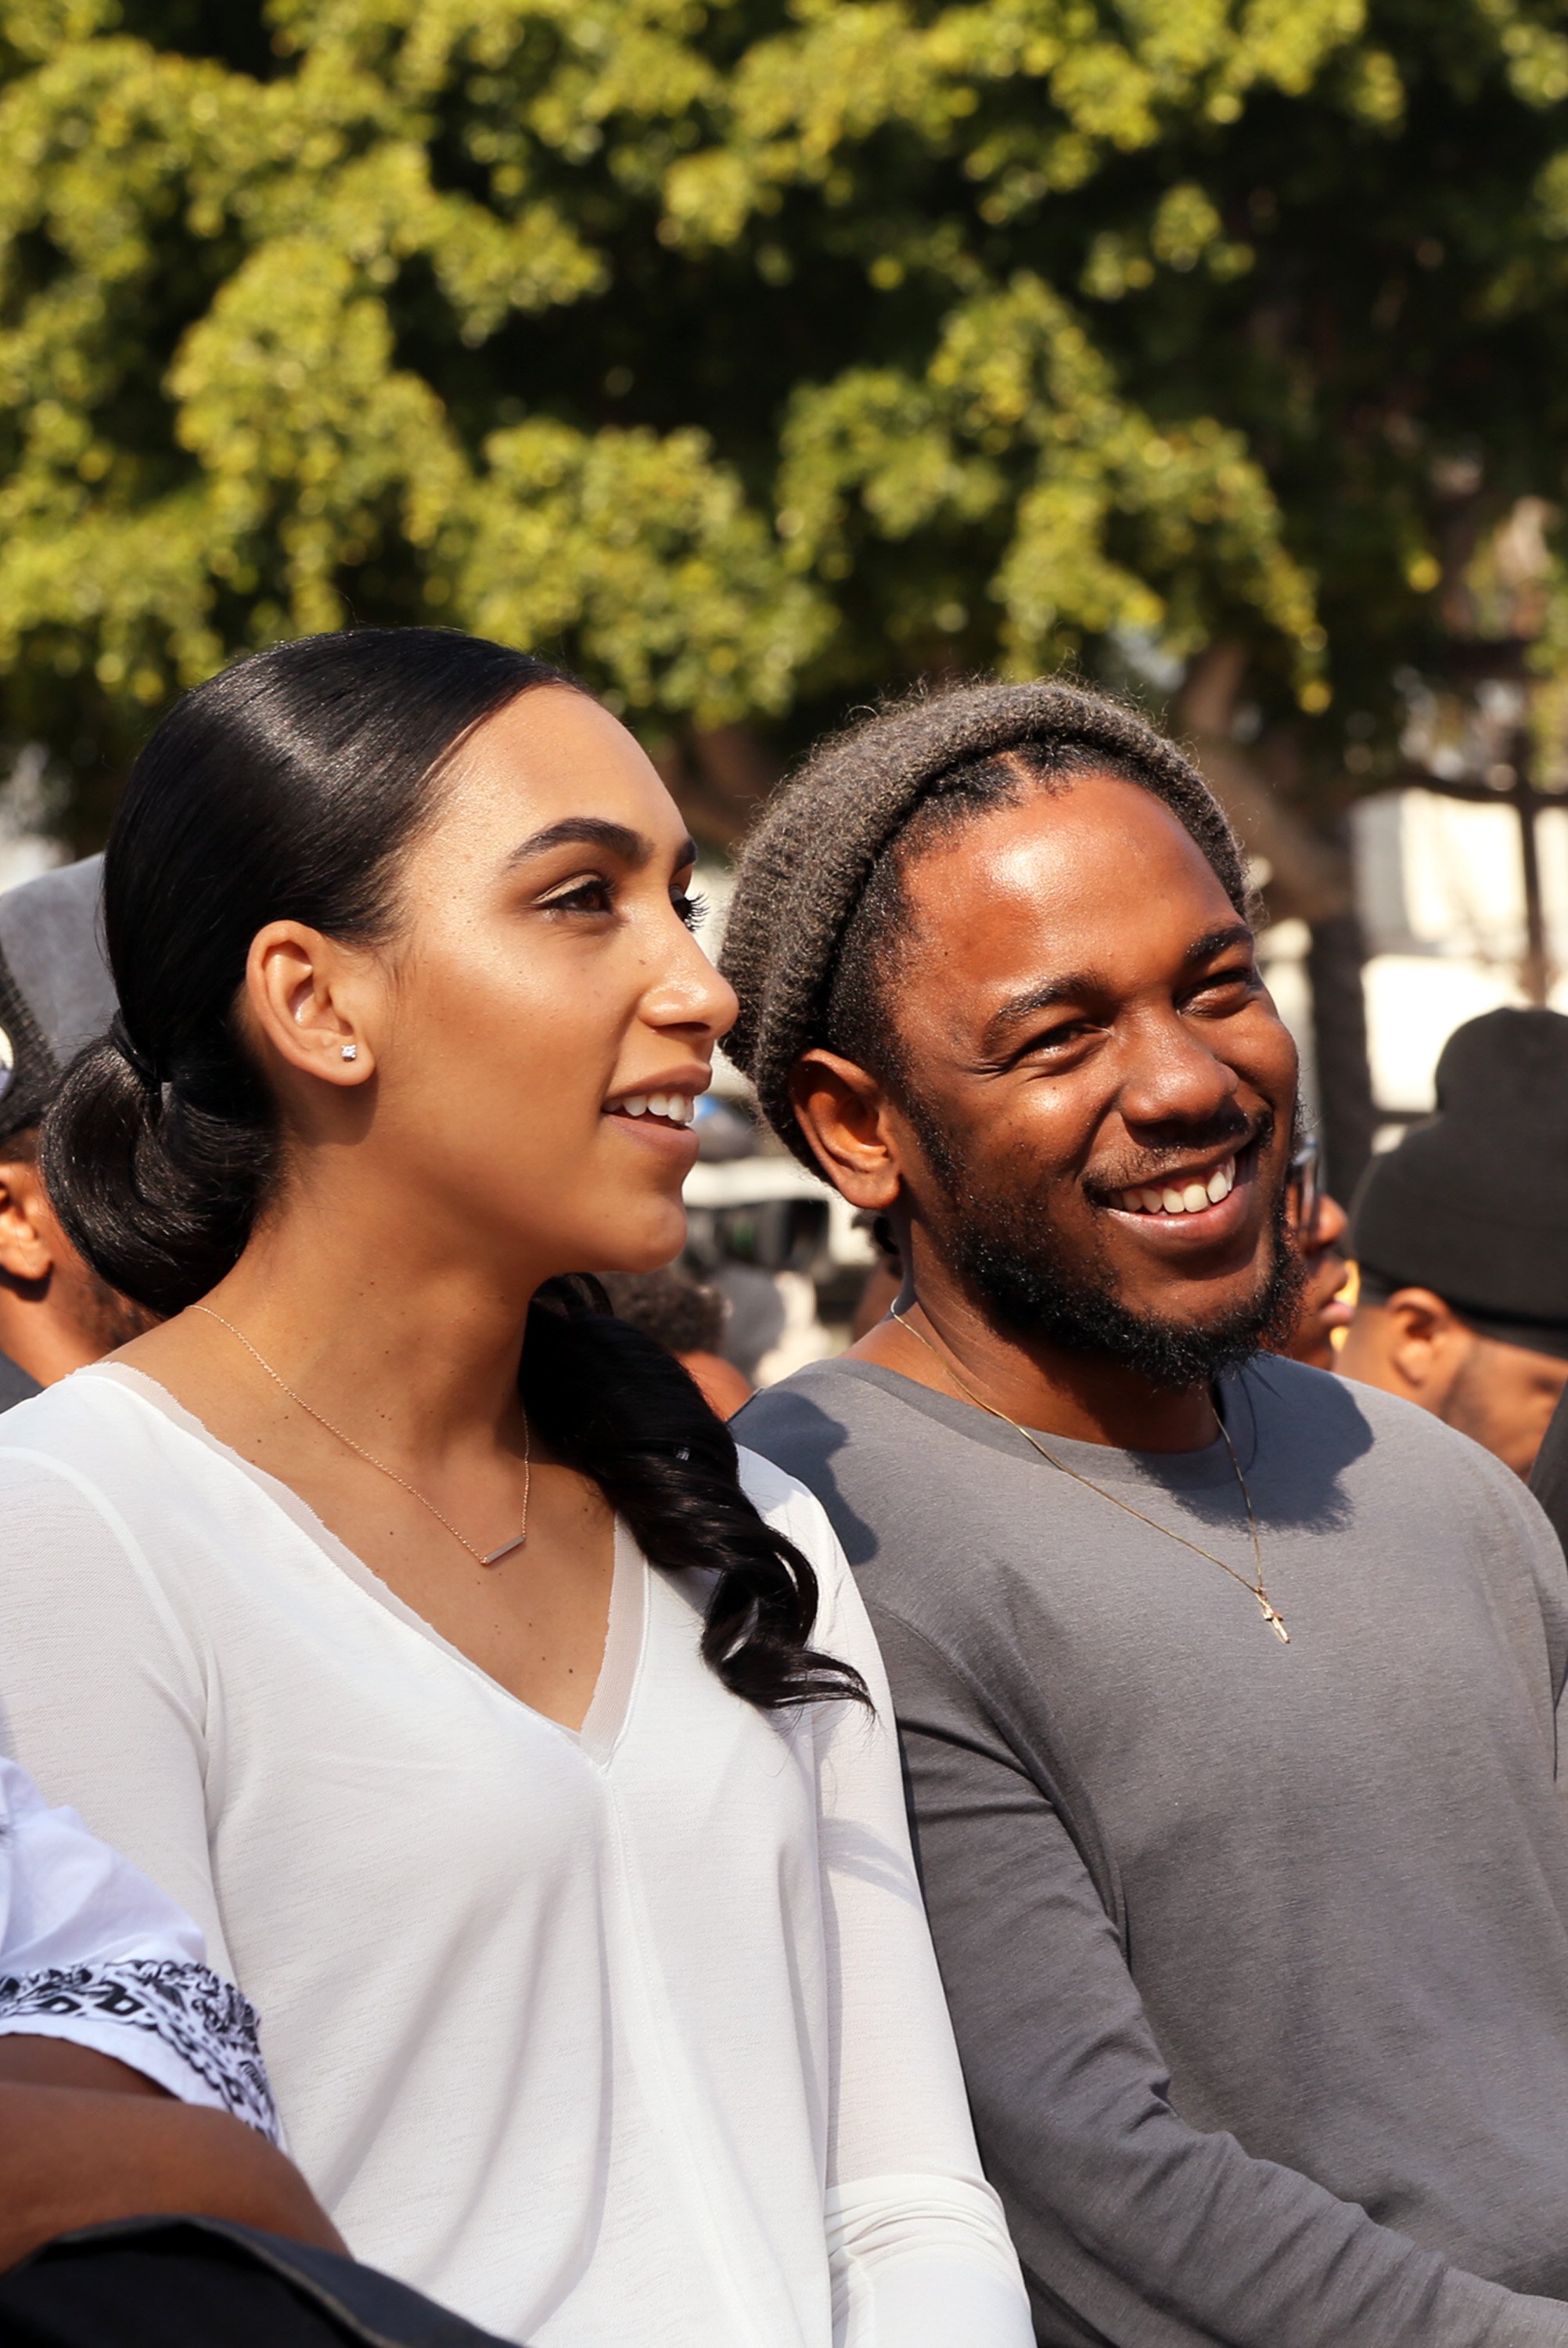 Whitney Alford and Kendrick Lamar attend the 2016 Key To The City Ceremony With Kendrick Lamar on February 13, 2016, in Compton, California. | Source: Getty Images